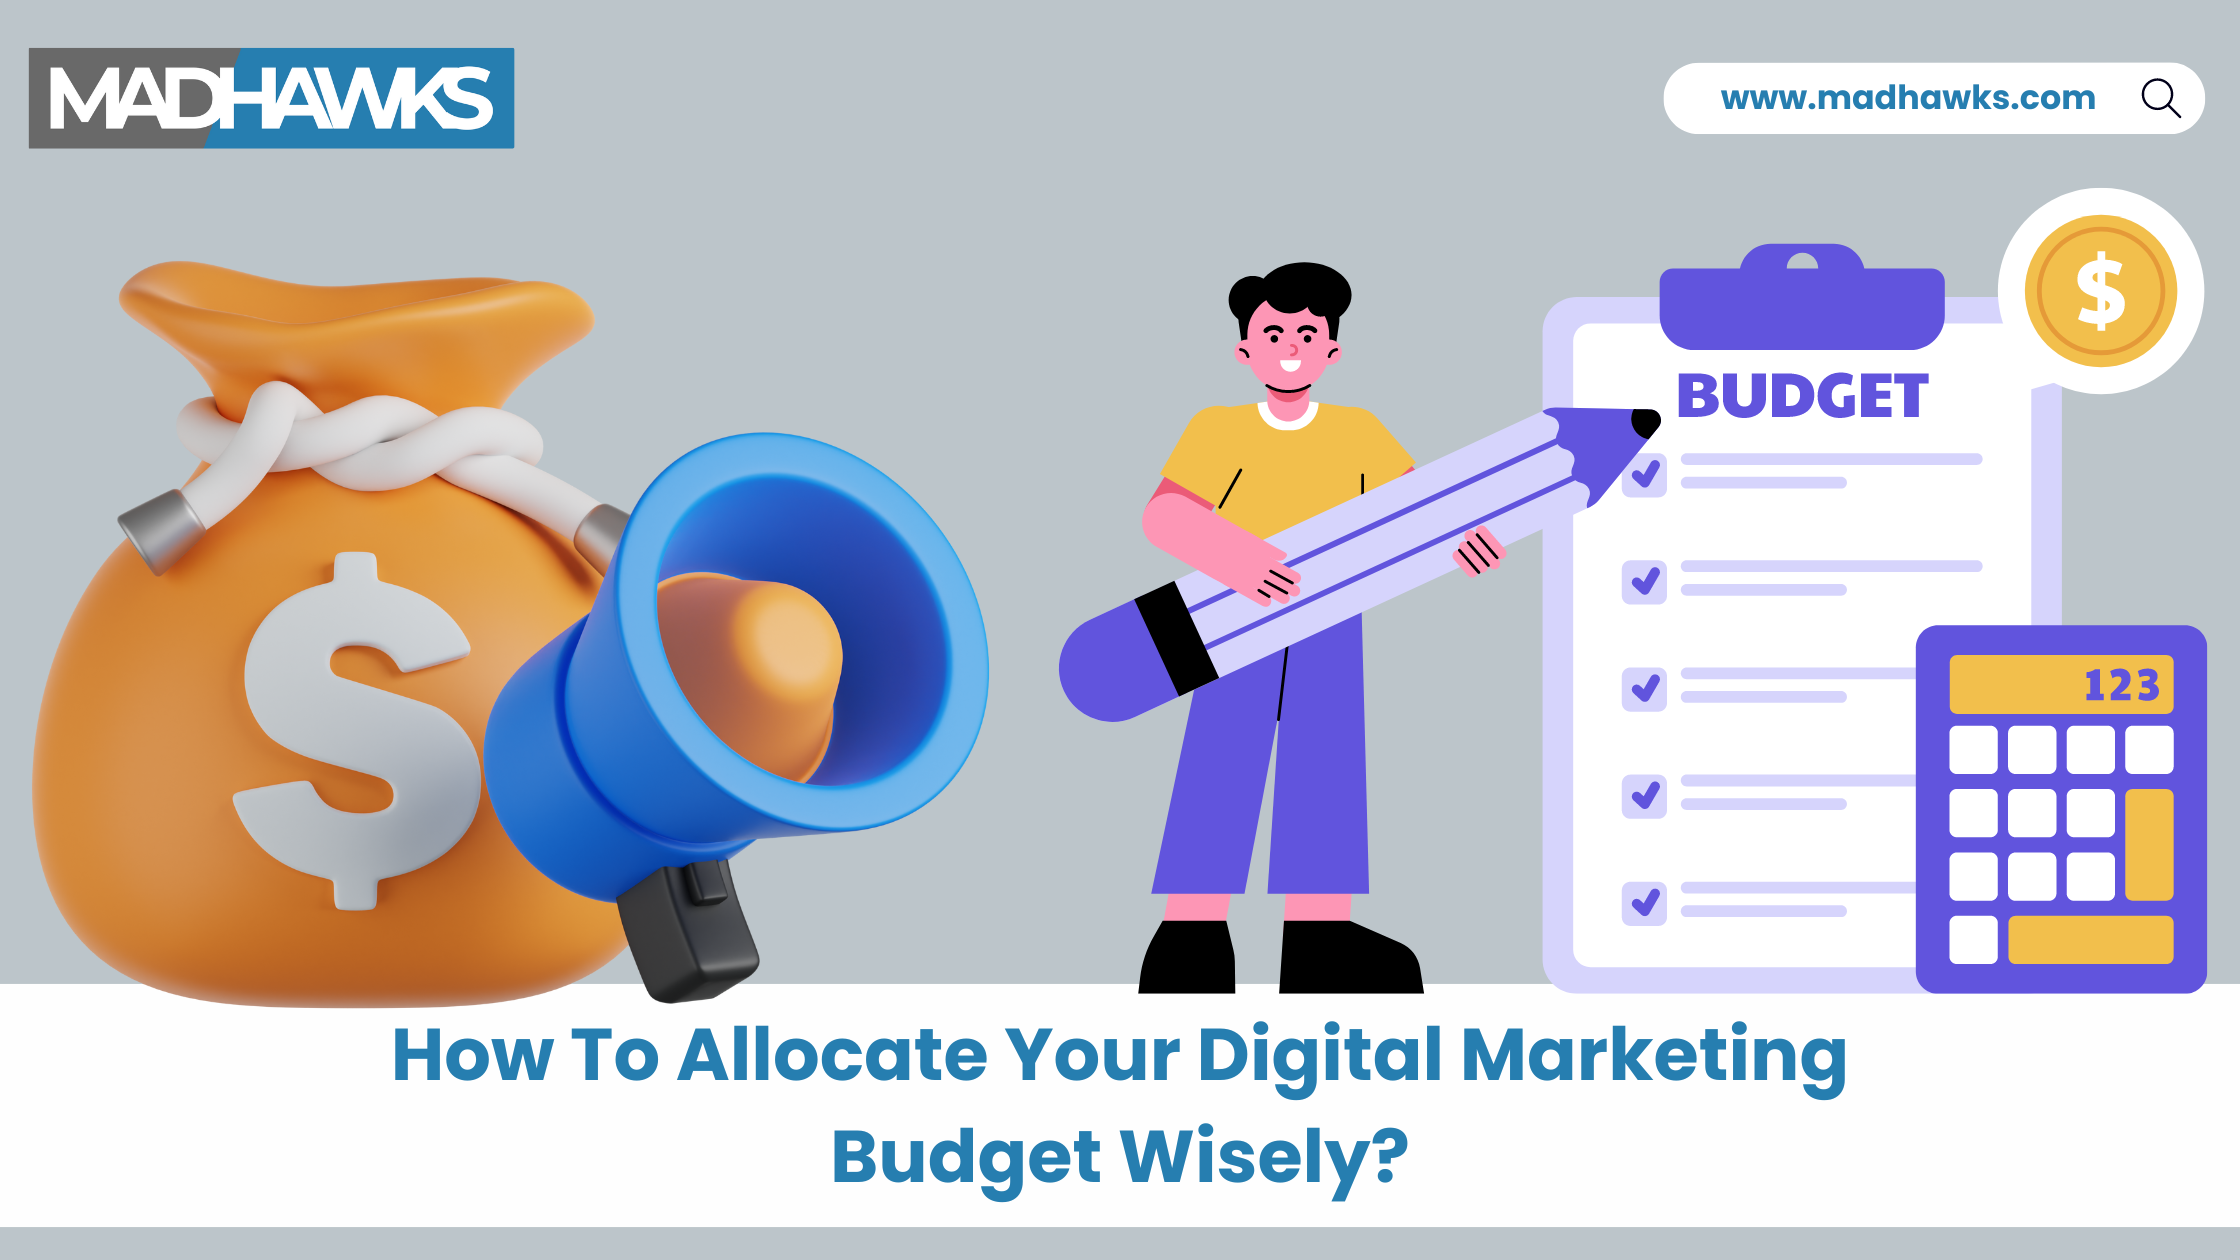 How To Allocate Your Digital Marketing Budget Wisely?